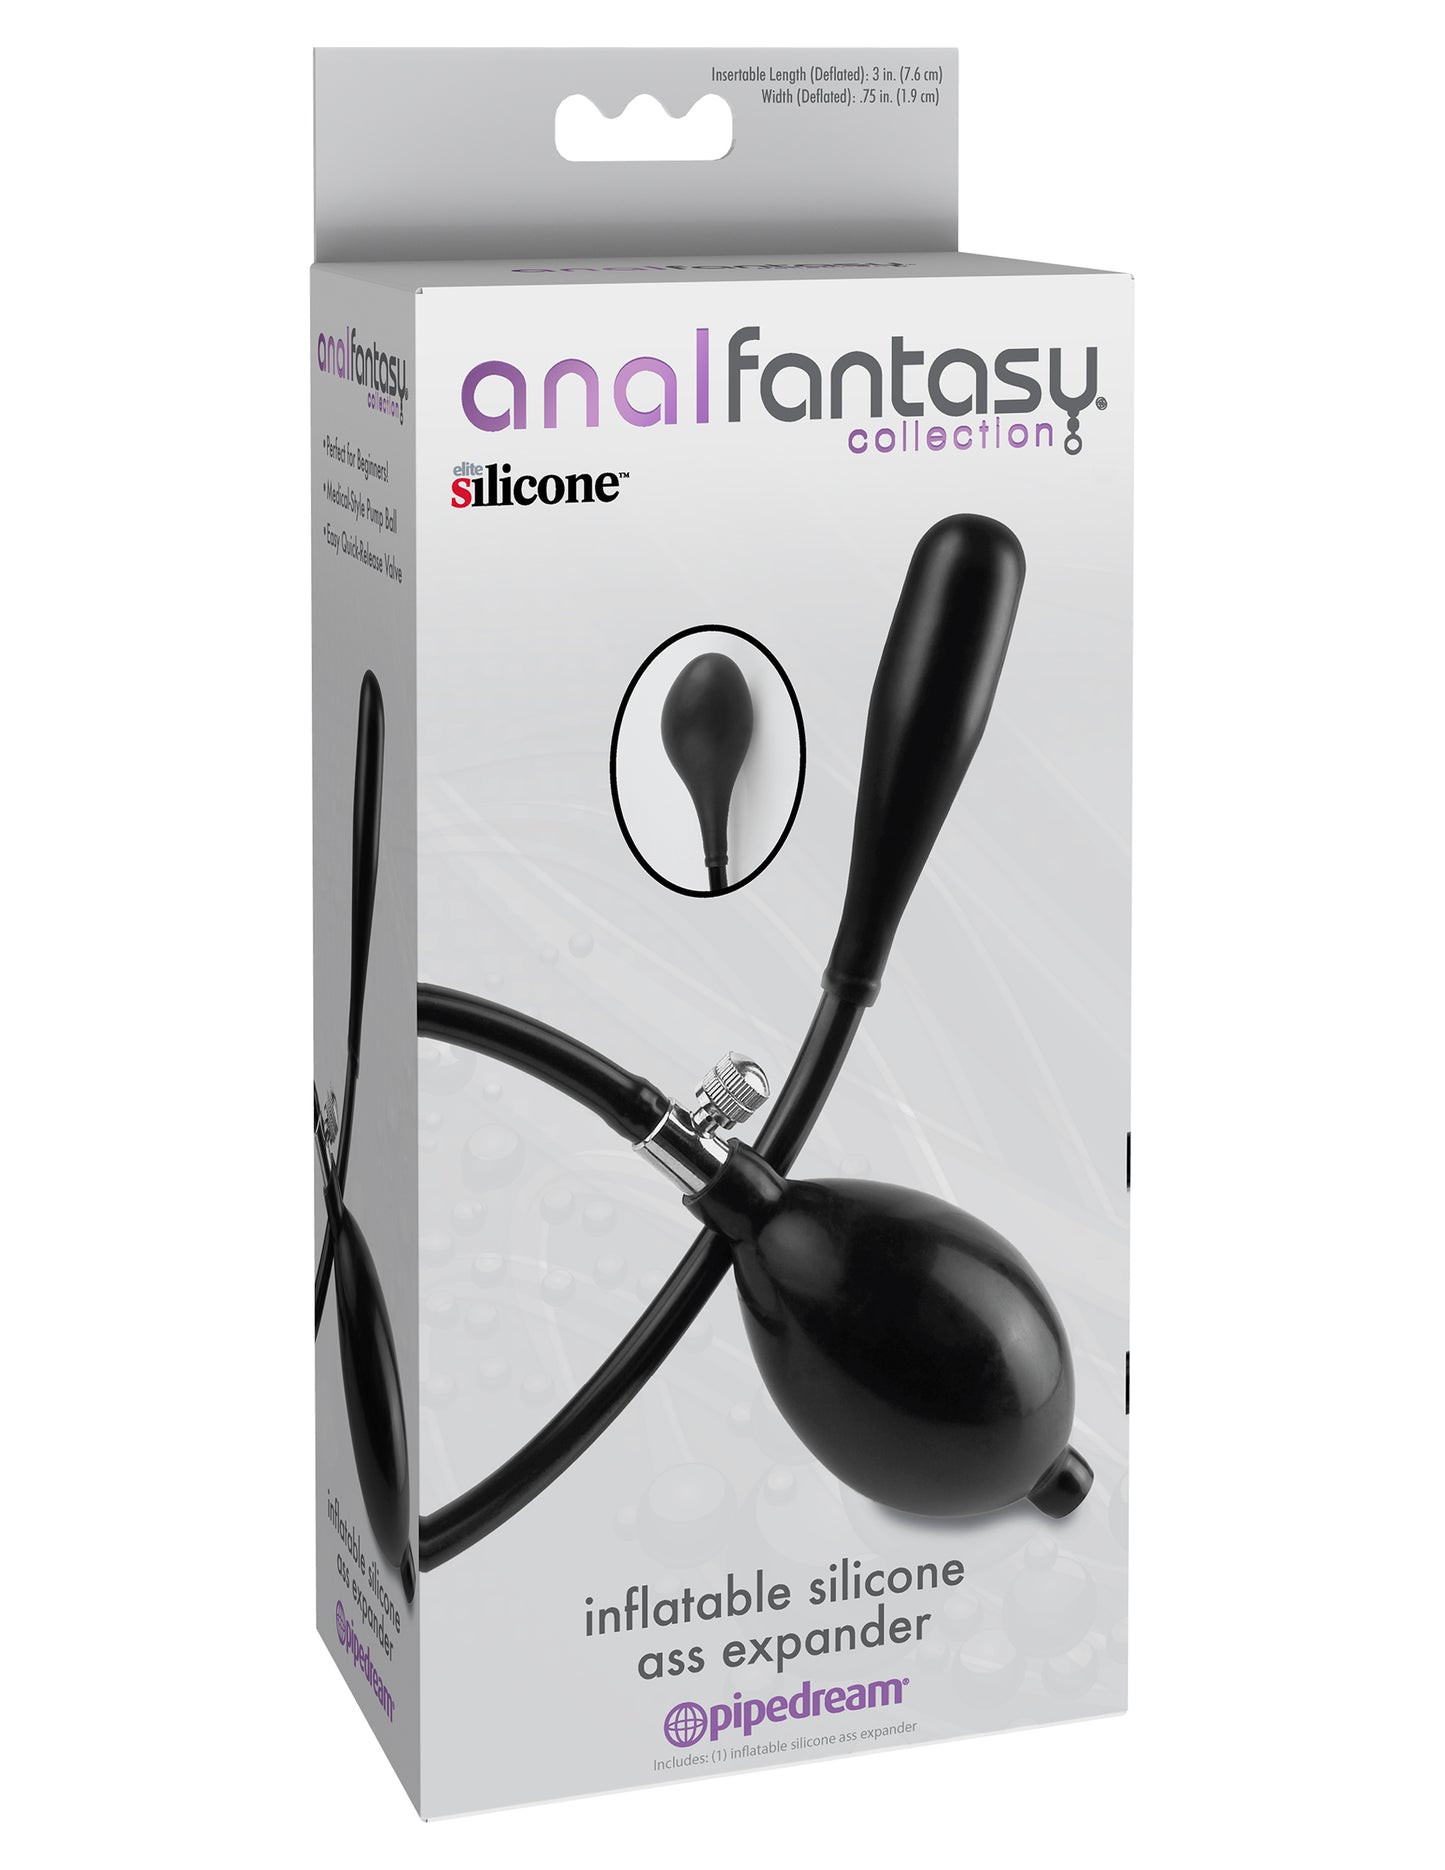 Anal Fantasy Collection Inflatable Silicone Ass Expander - Black PD4667-23